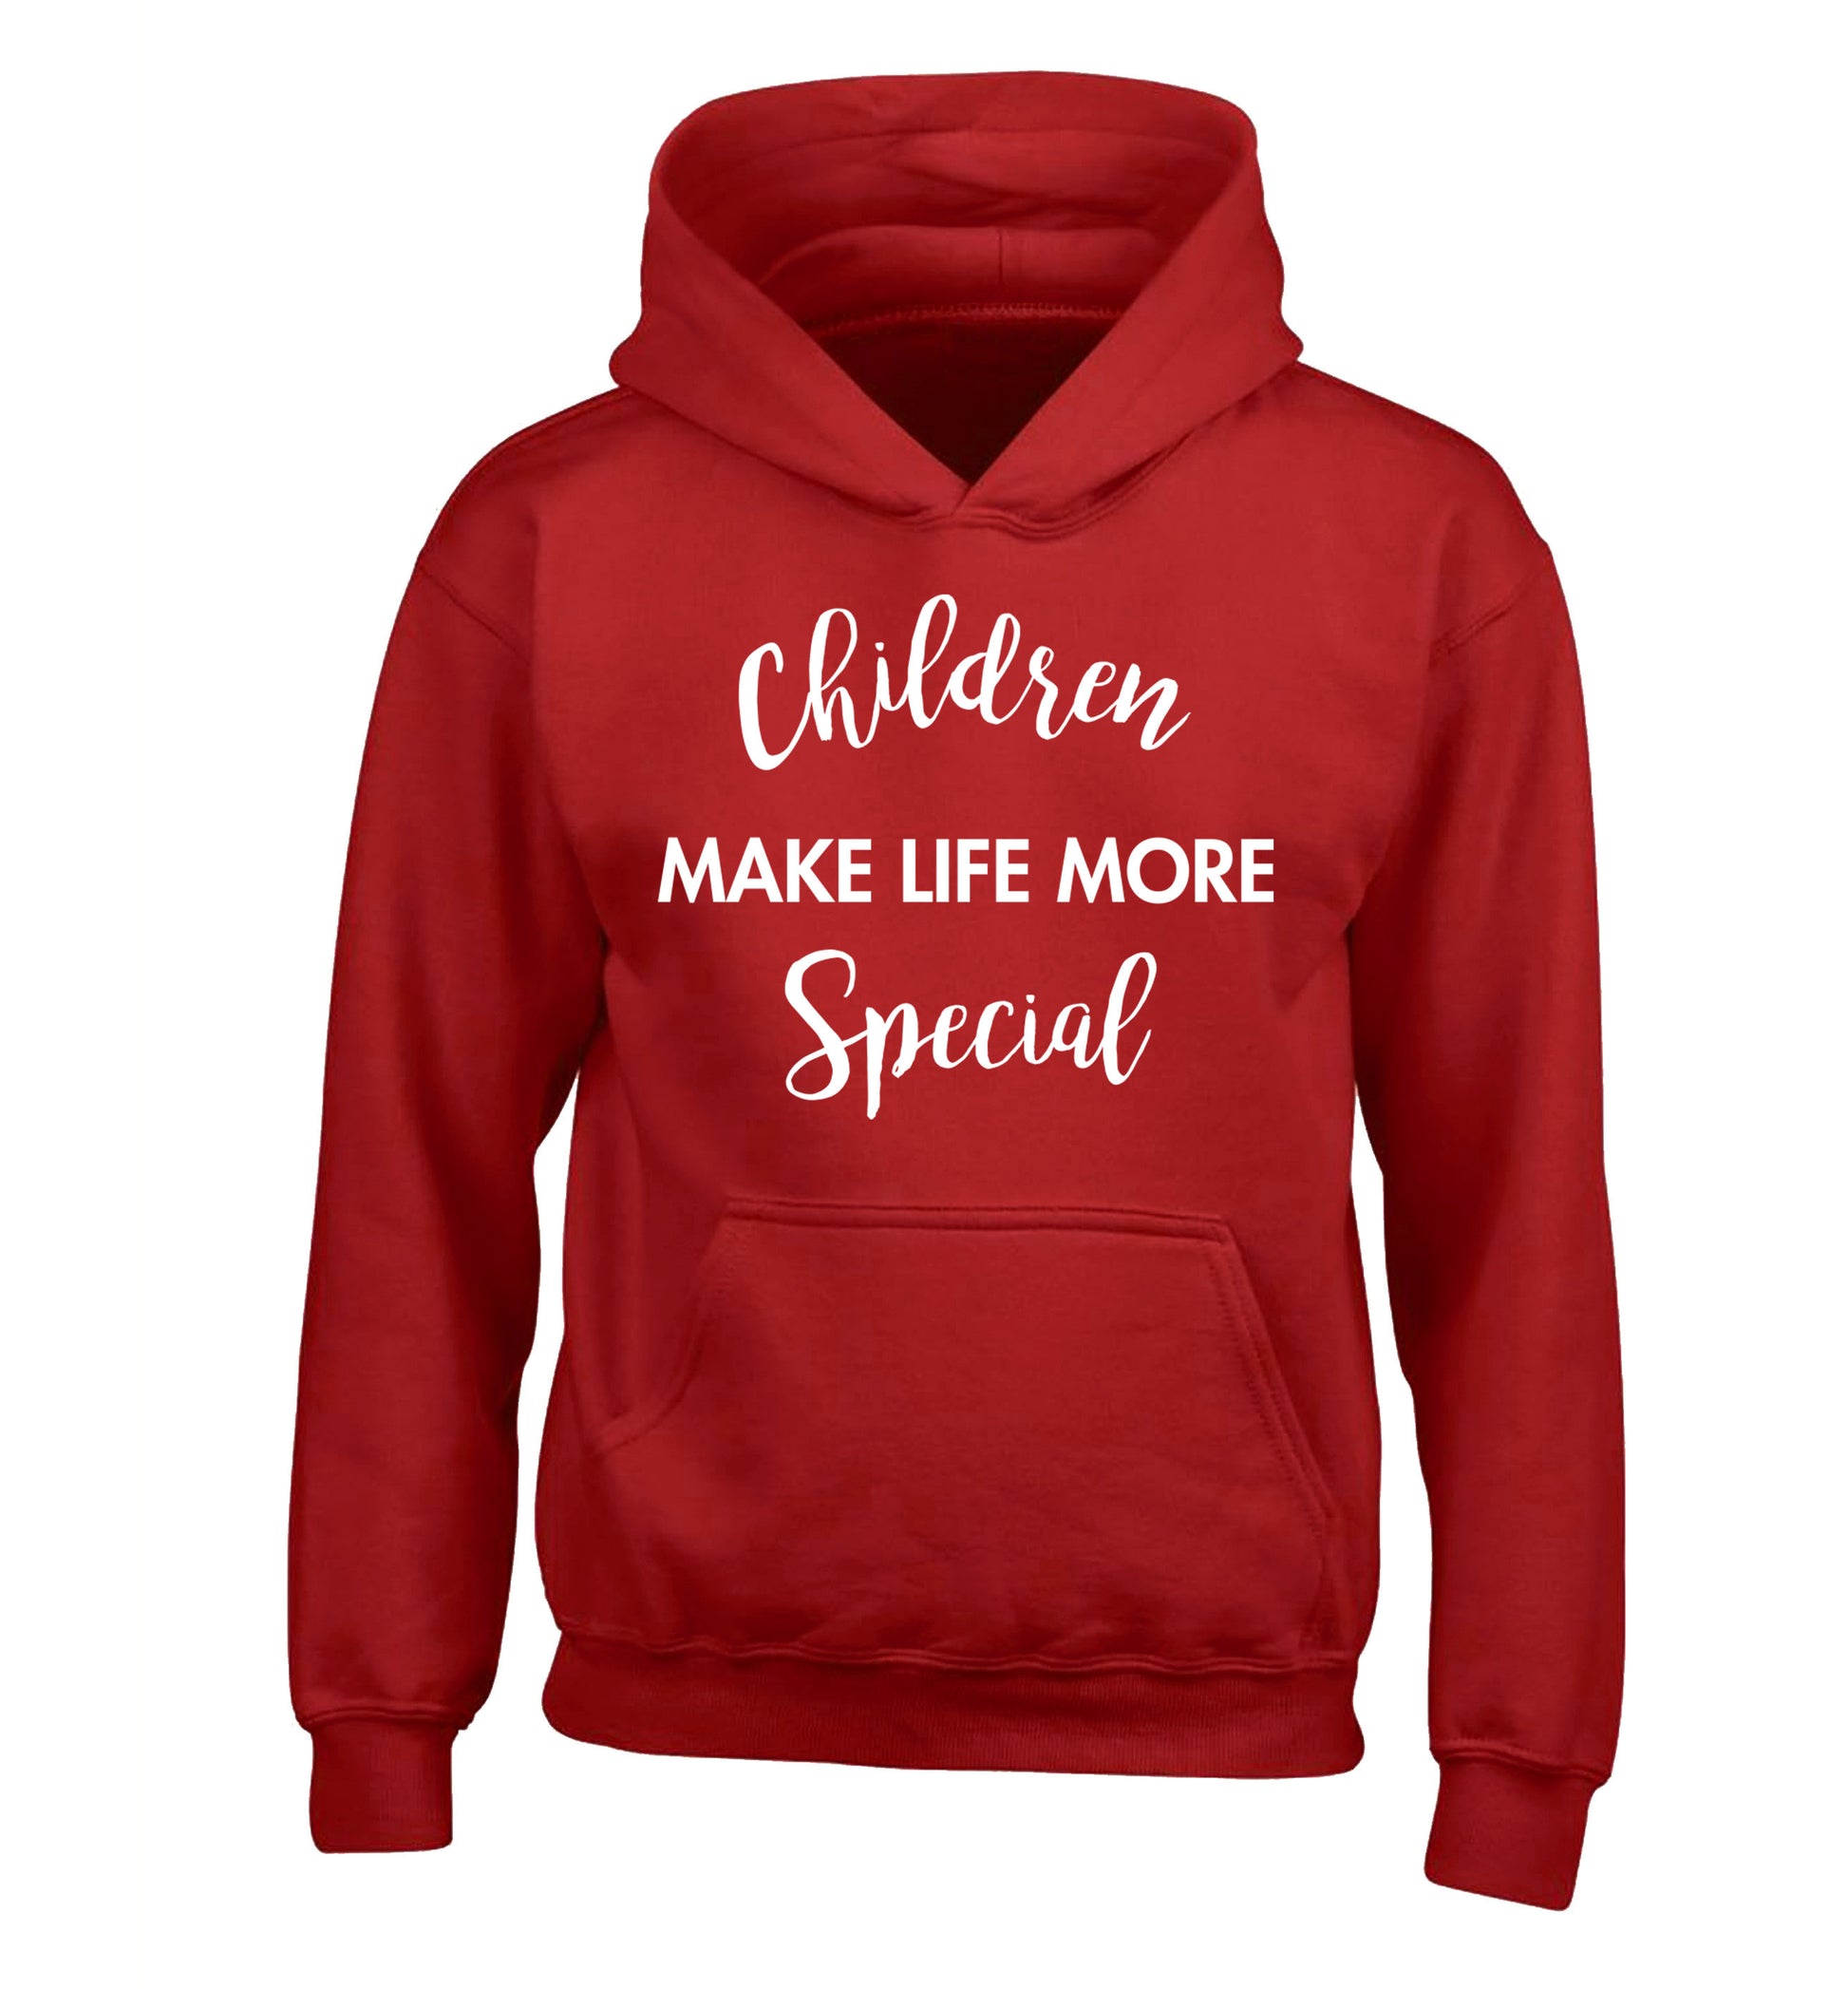 Children make life more special children's red hoodie 12-14 Years